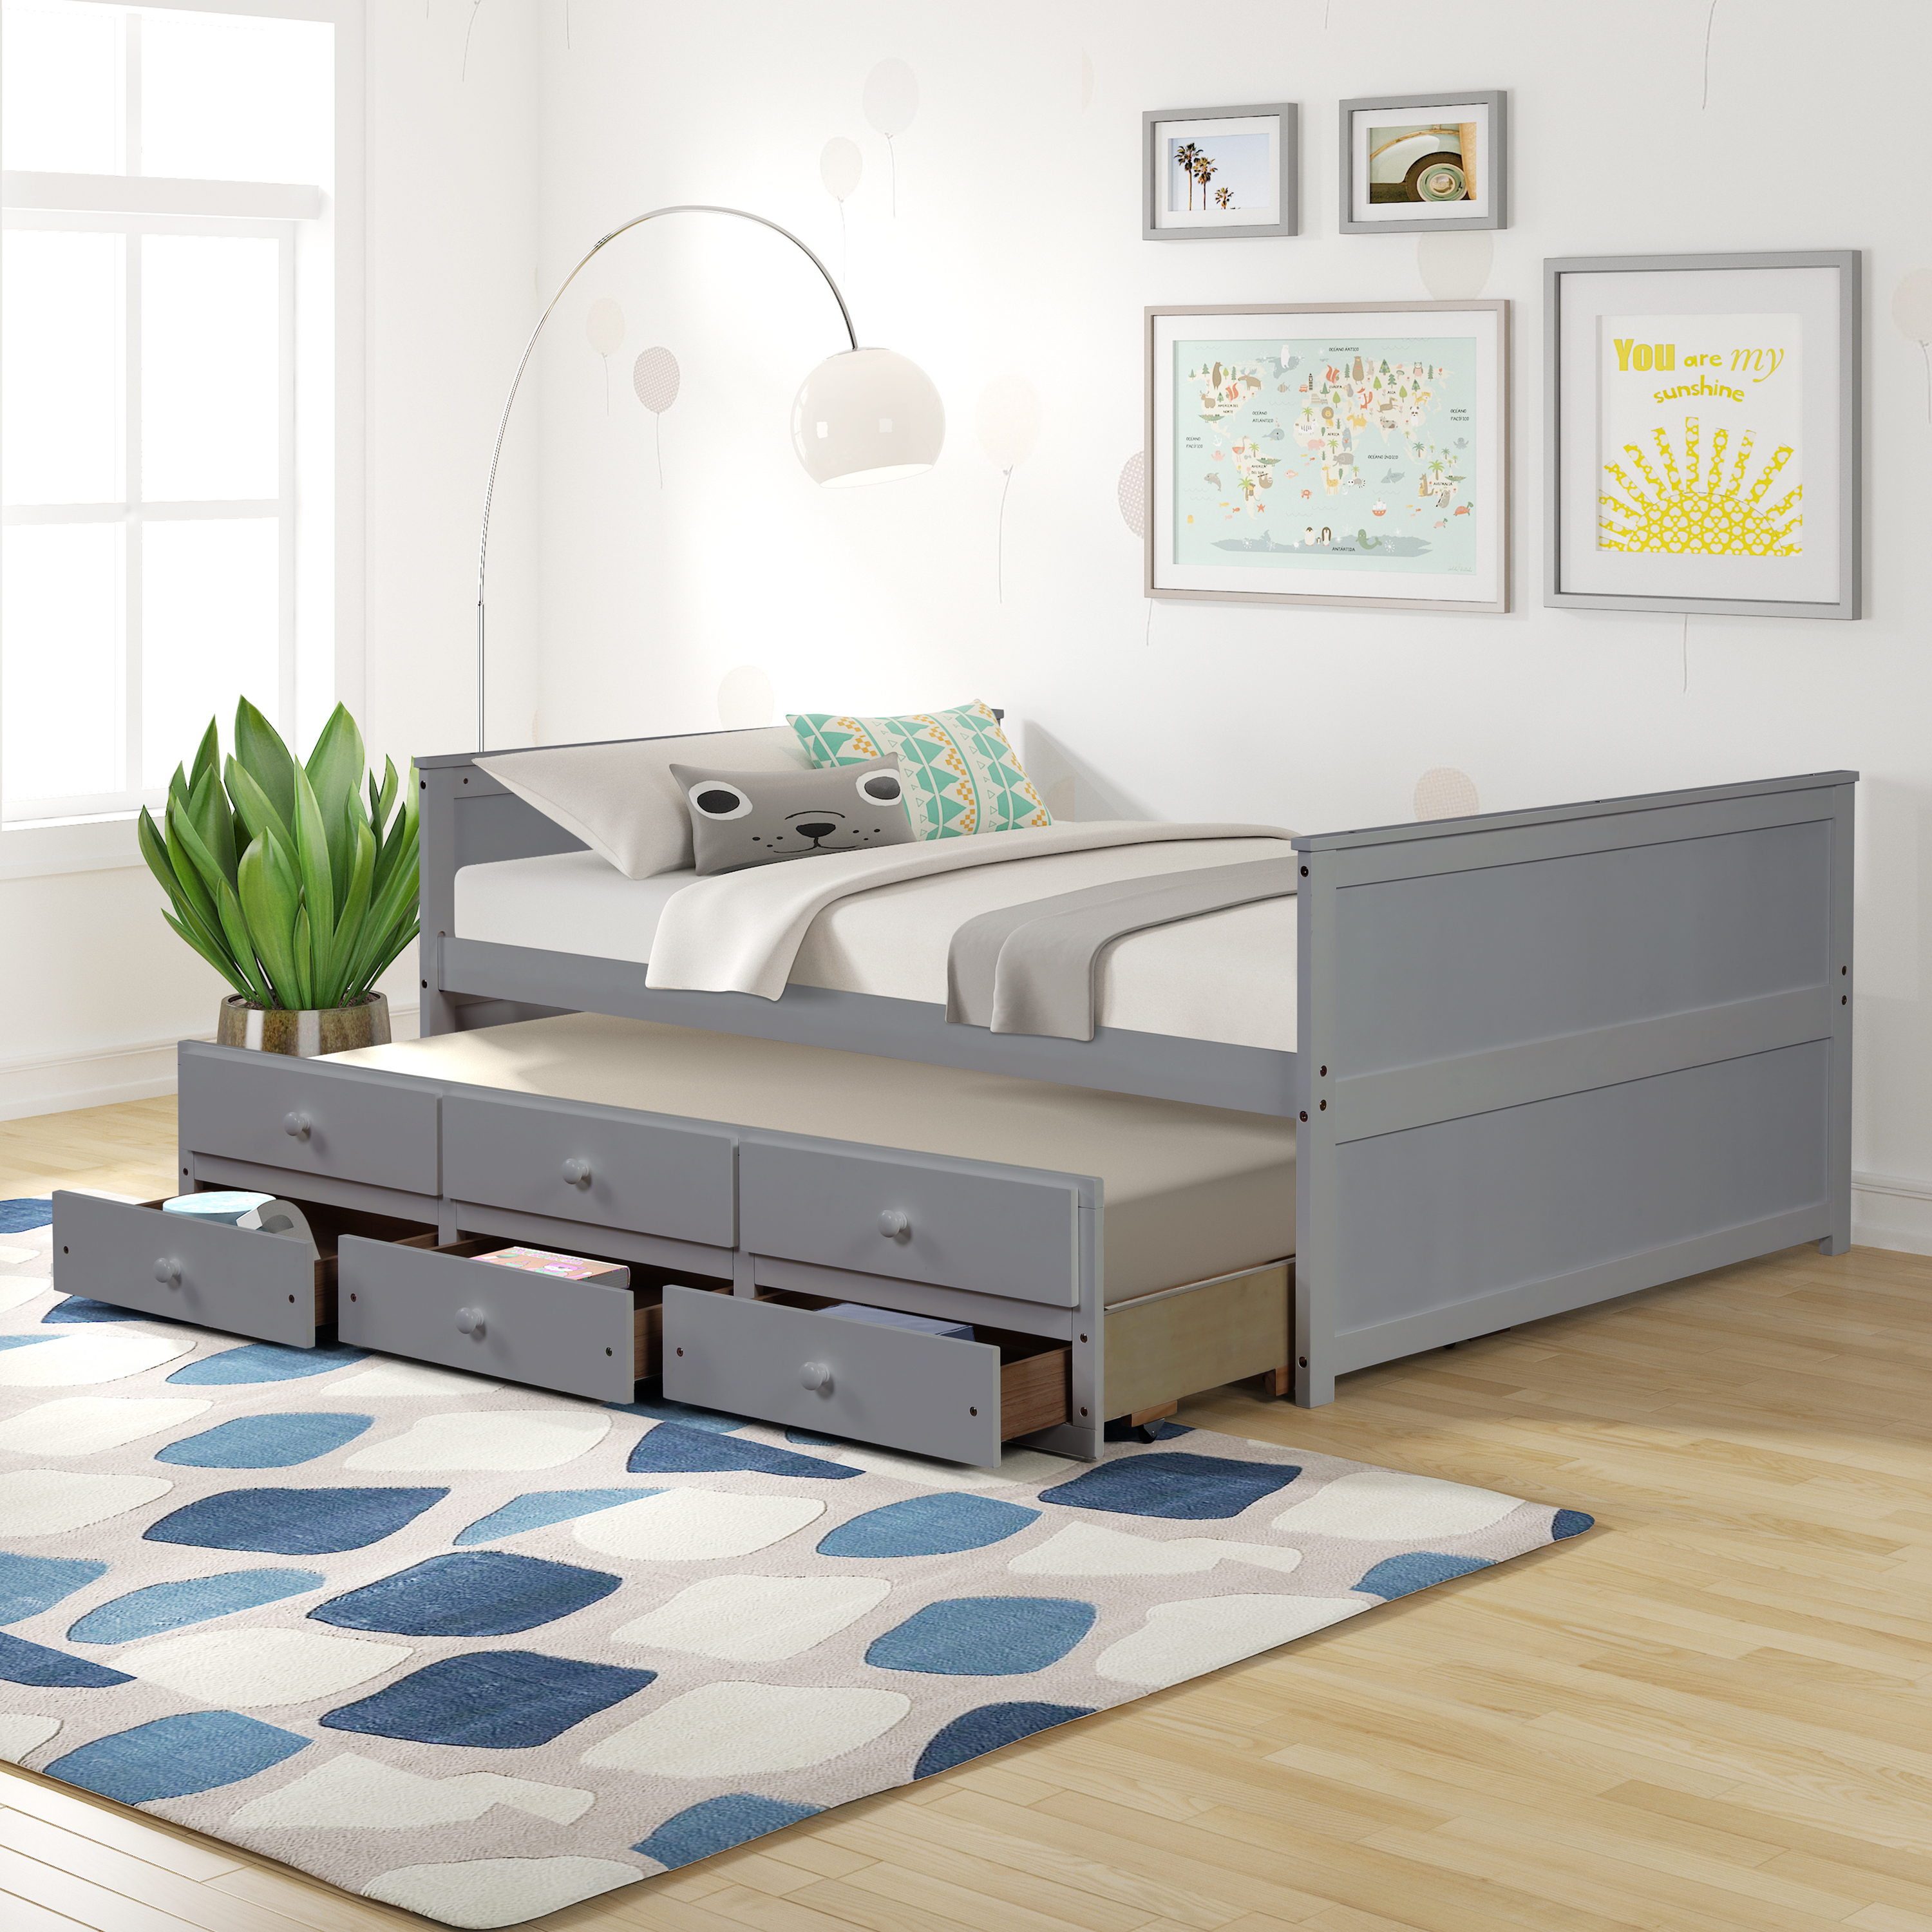 FULL CAPTAIN BED WITH TWIN TRUNDL AND 3 DRAWERS-Boyel Living